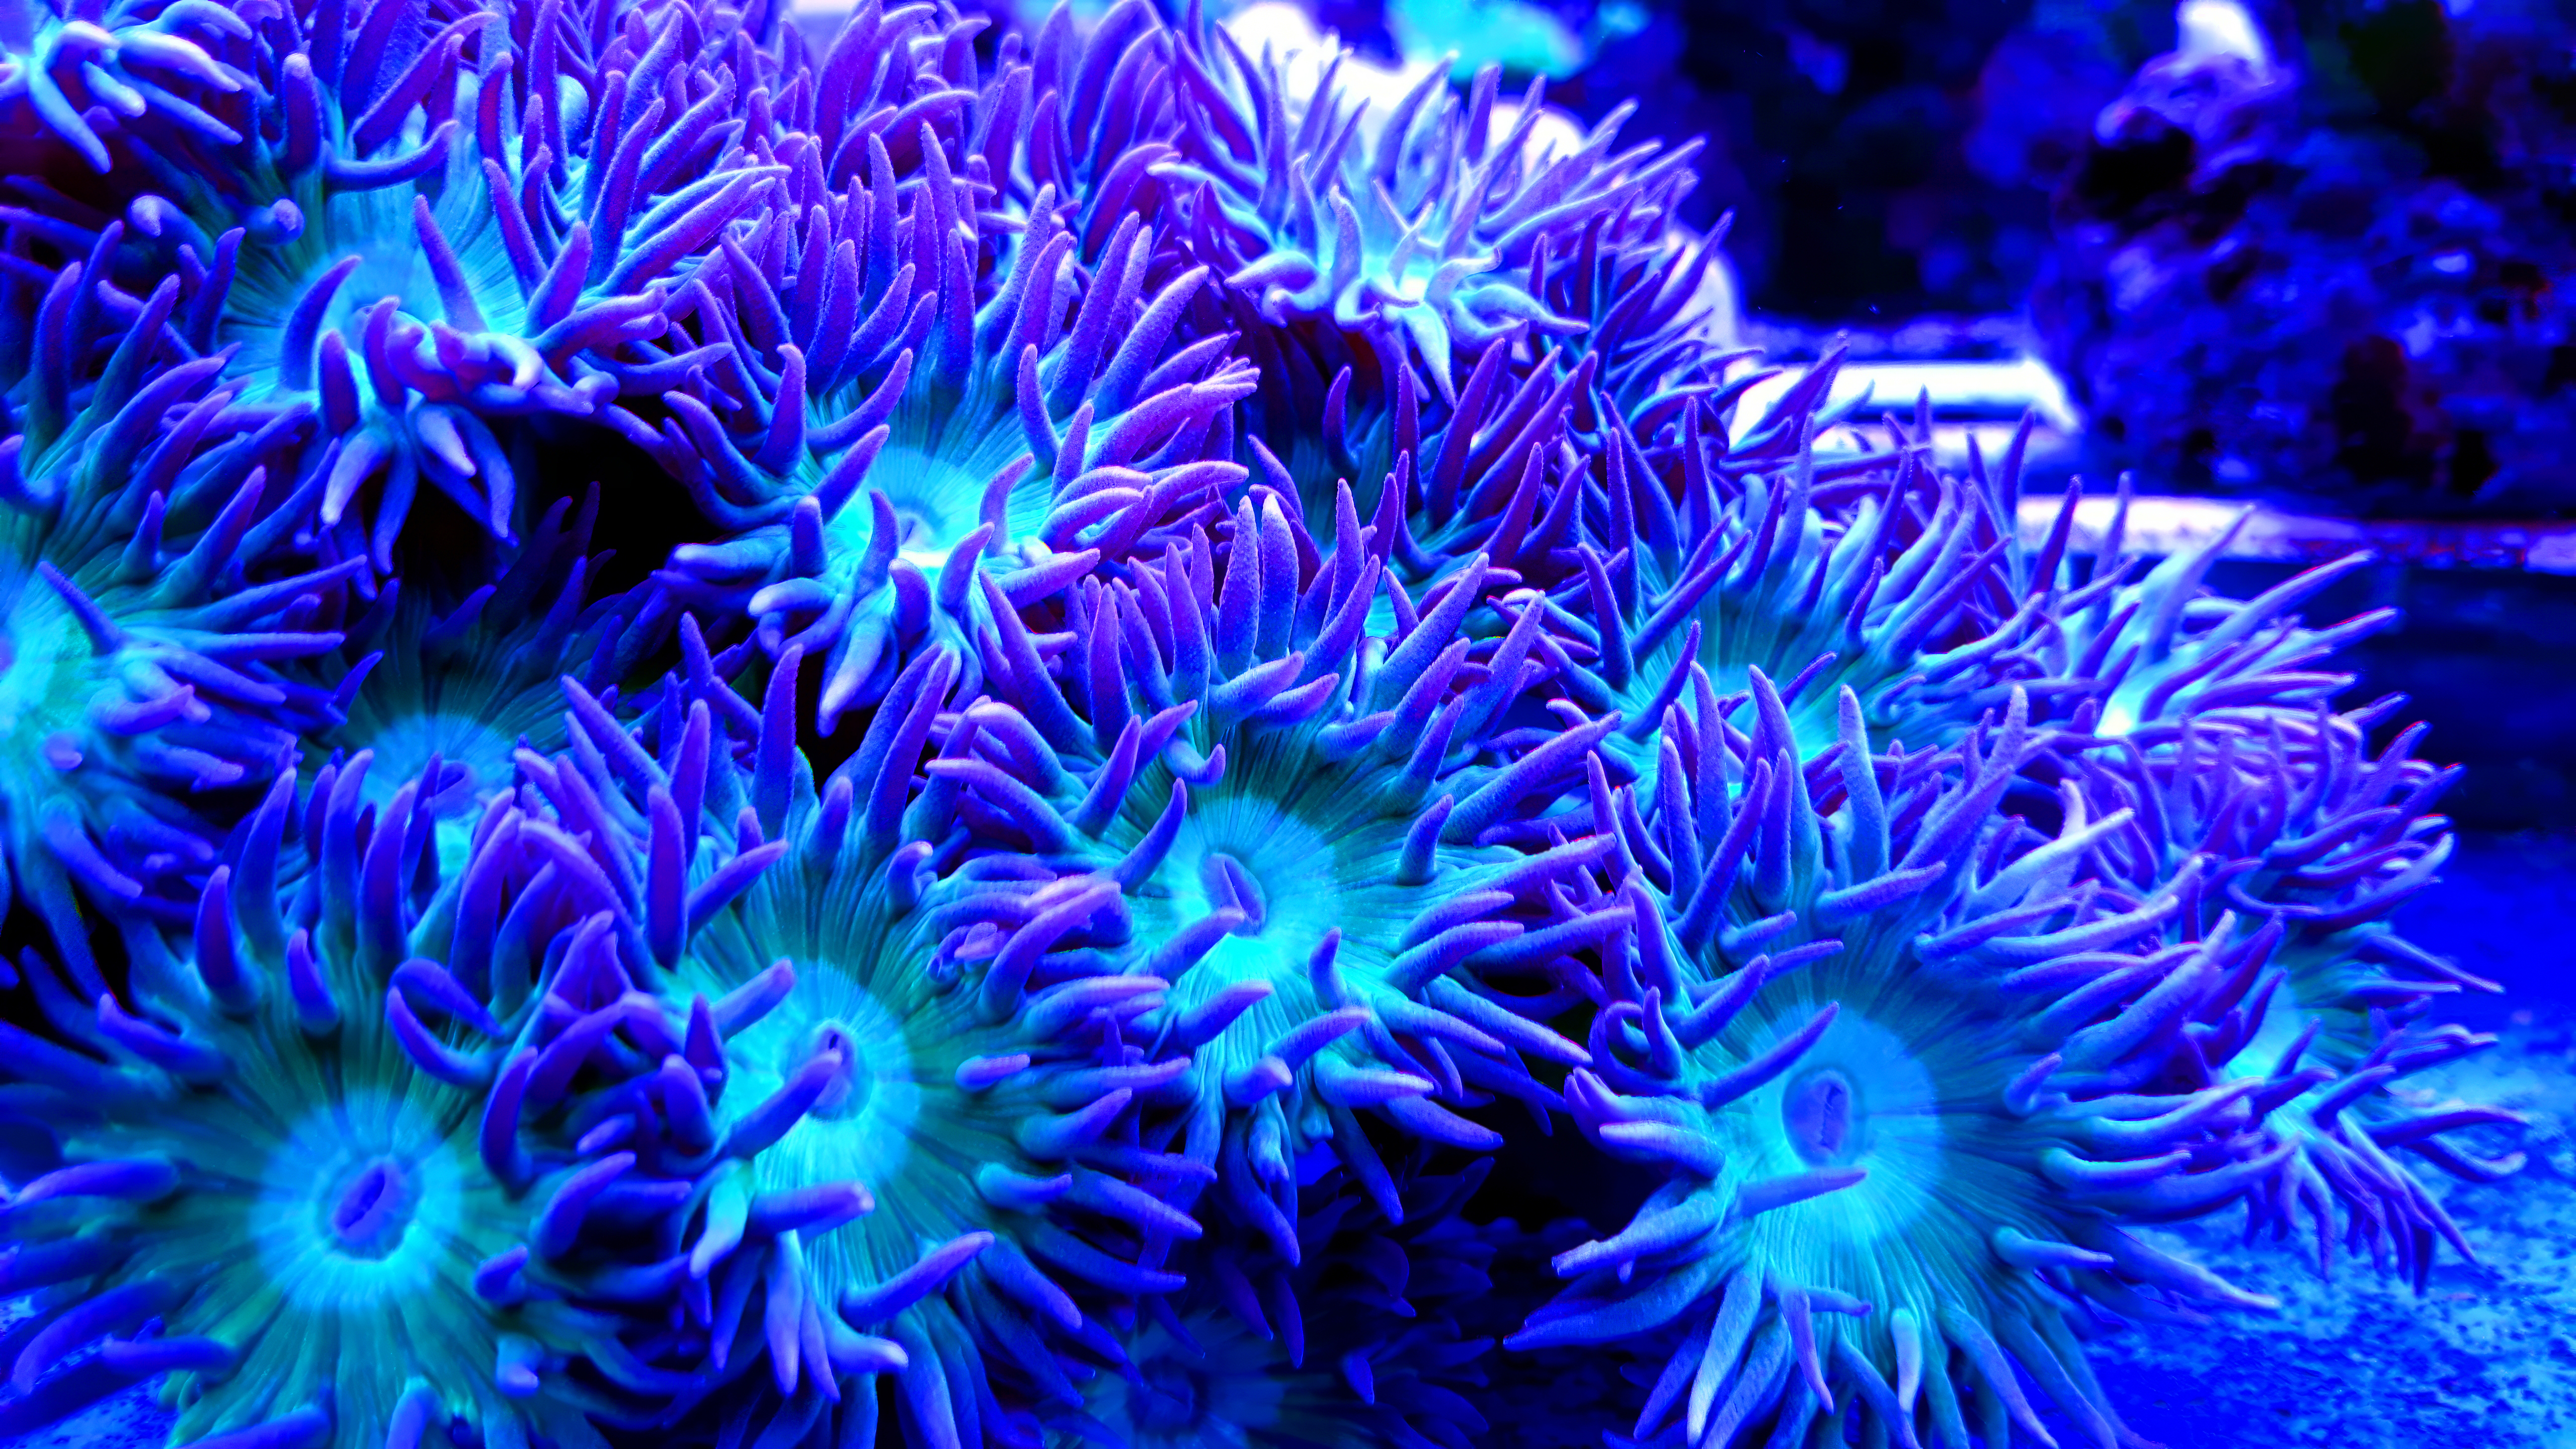 General 5120x2880 coral reef underwater blue turquoise bright nature